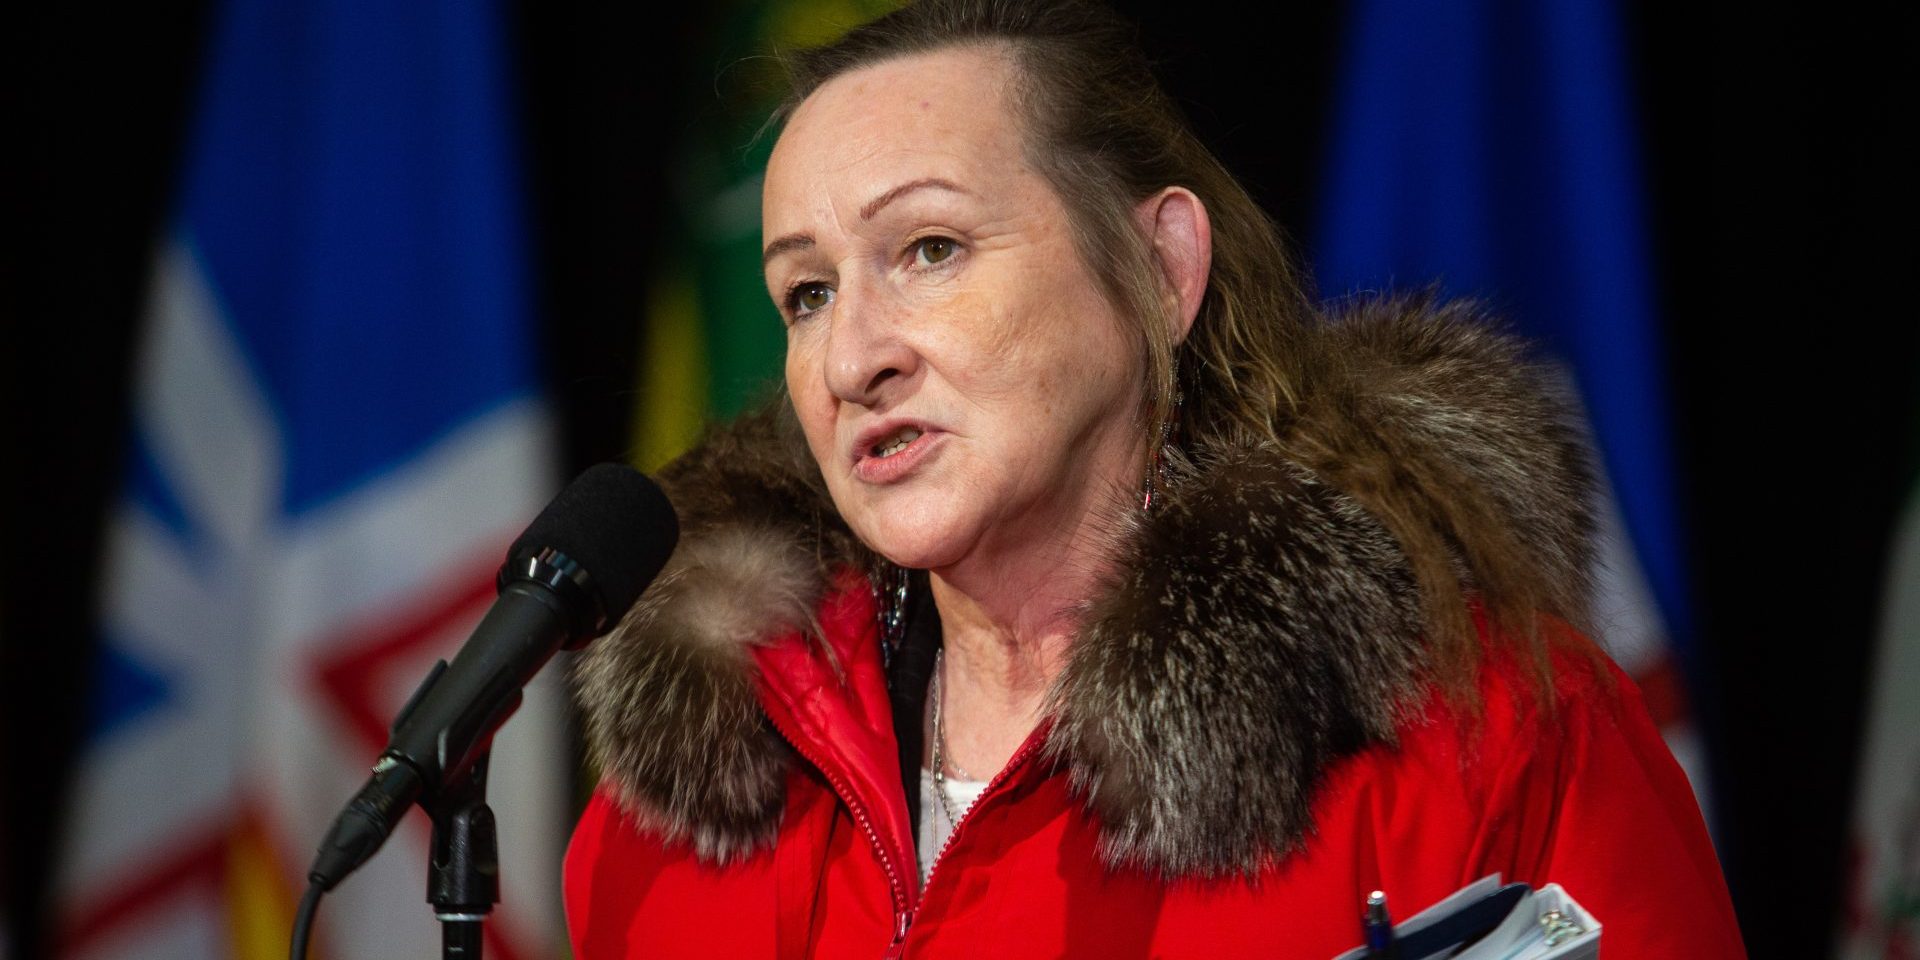 Northwest Territories Premier Caroline Cochrane, pictured in Ottawa in 2023. The Hill Times photograph by Andrew Meade